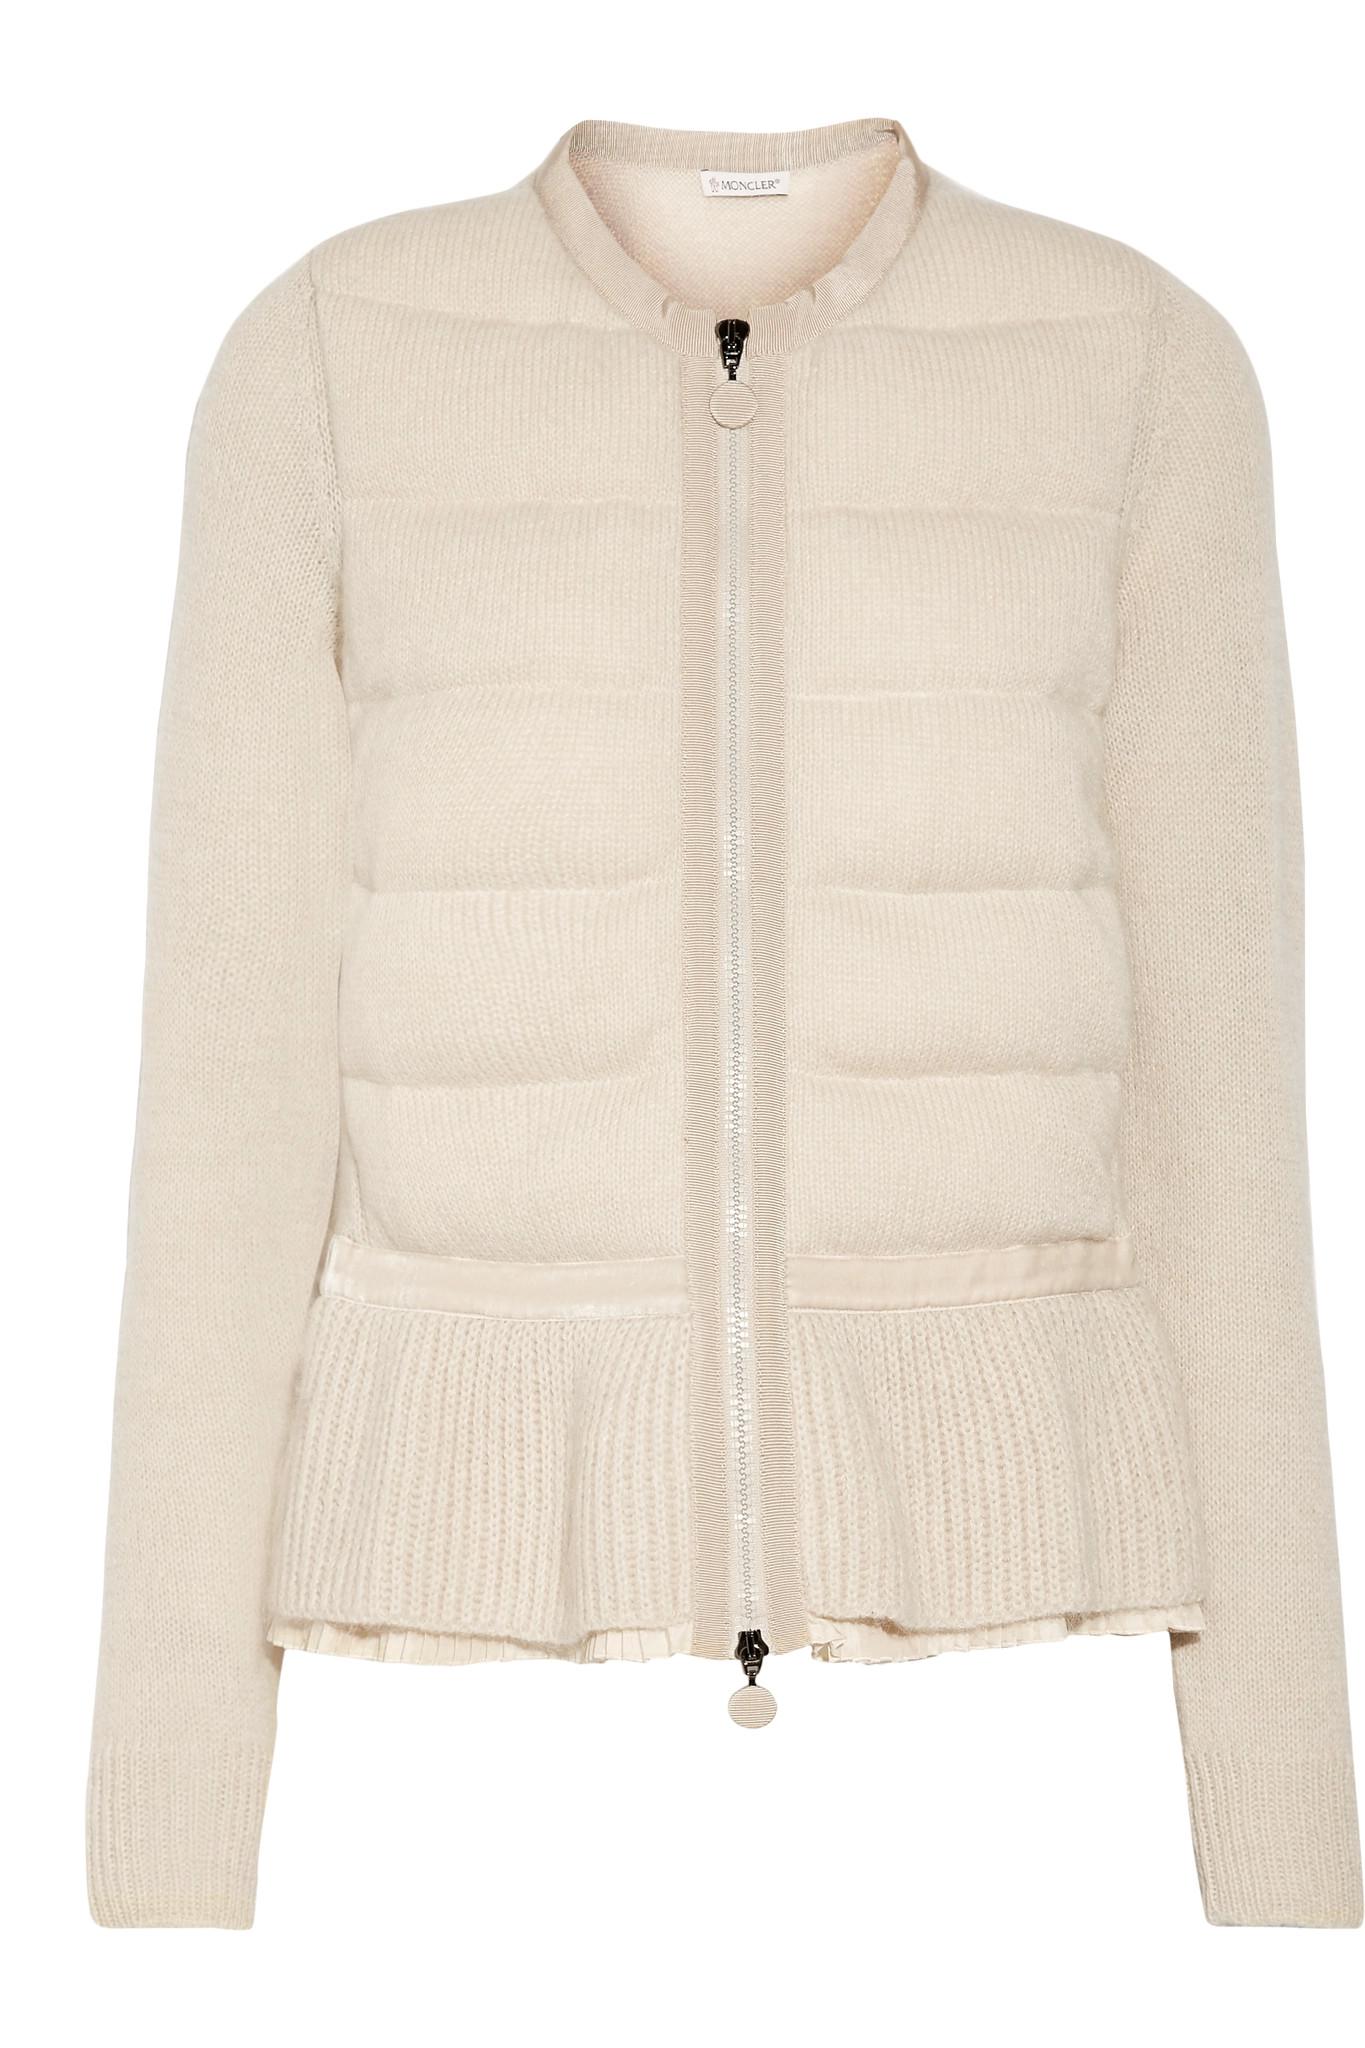 Moncler Wool Quilted Knitted Cardigan in Beige (Natural) - Lyst